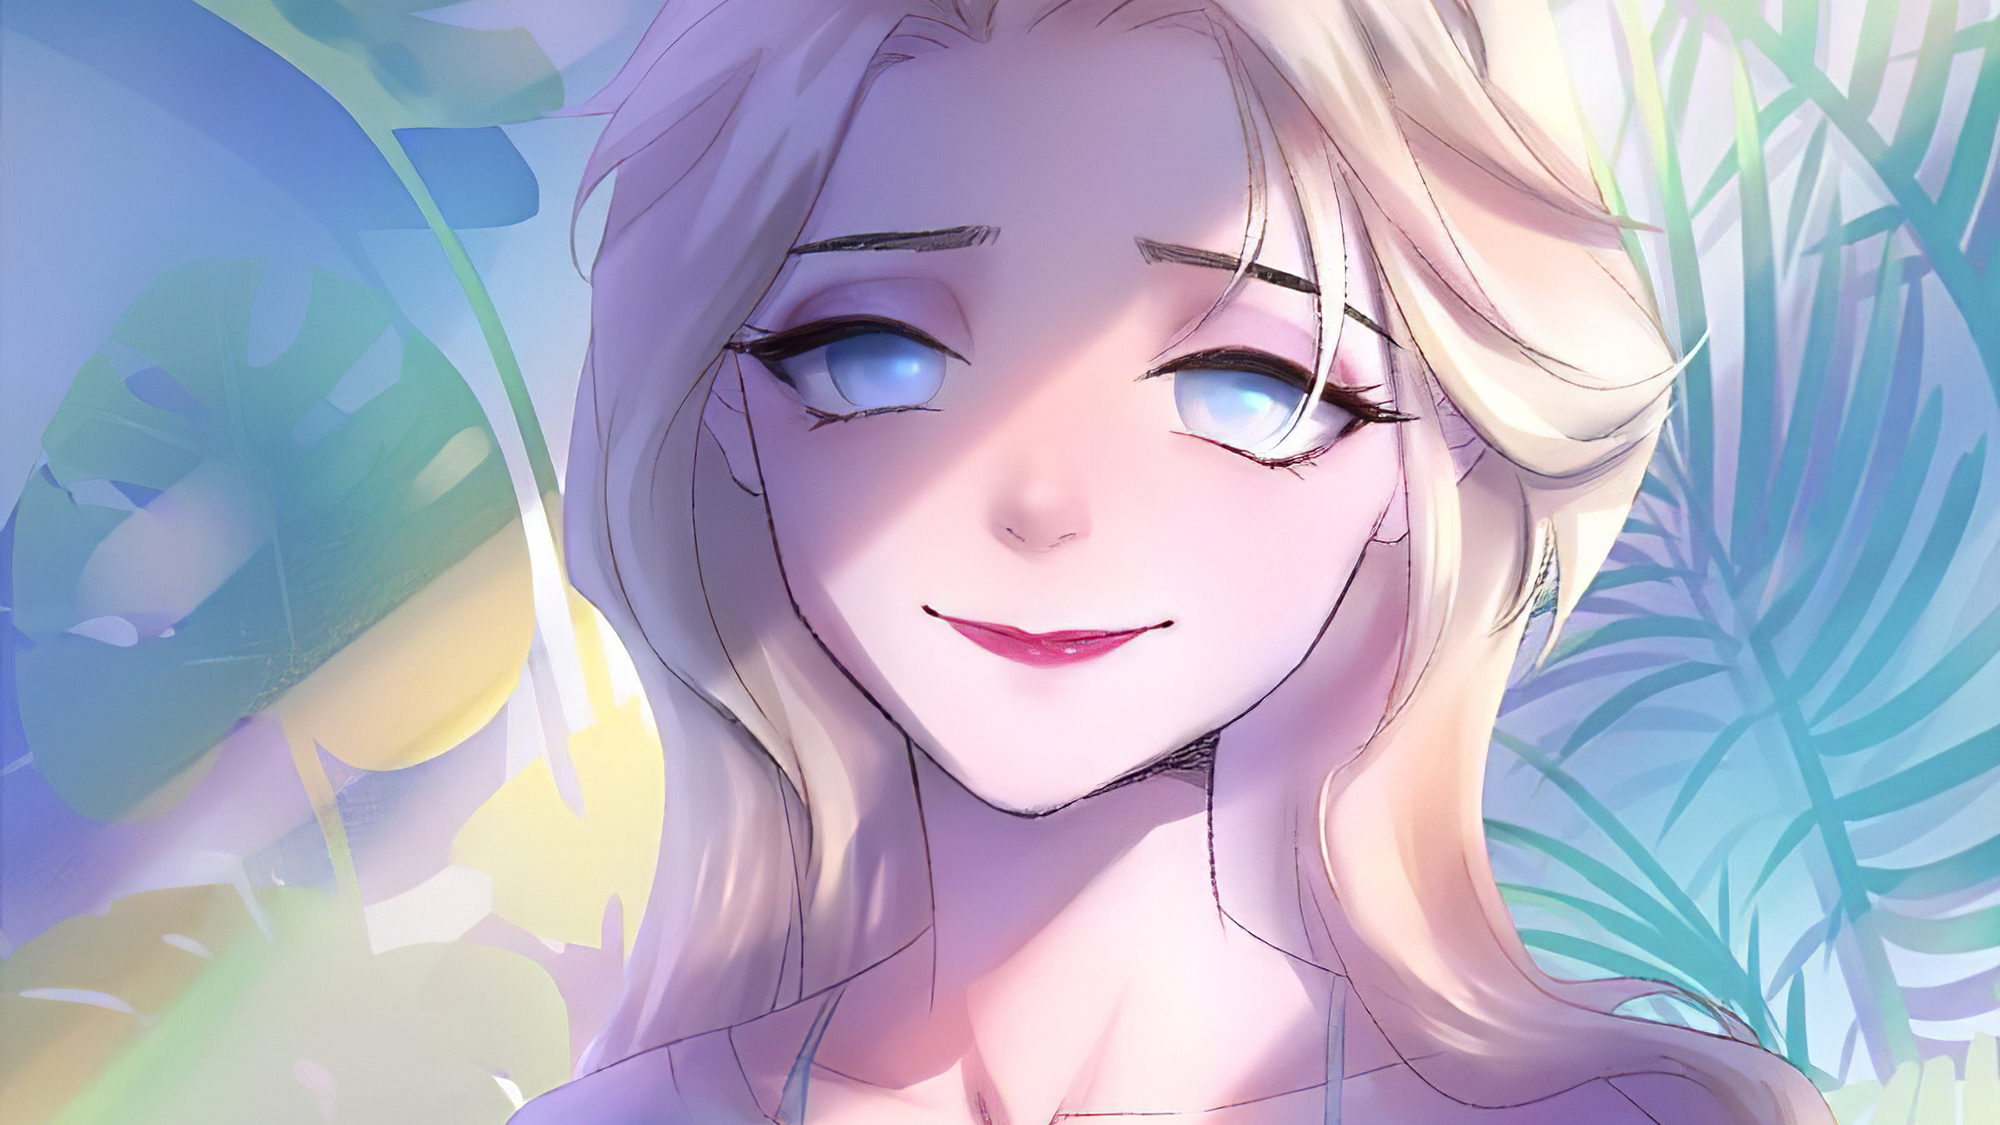 Illustration of a beautiful woman with blonde hair and blue eyes - Elsa